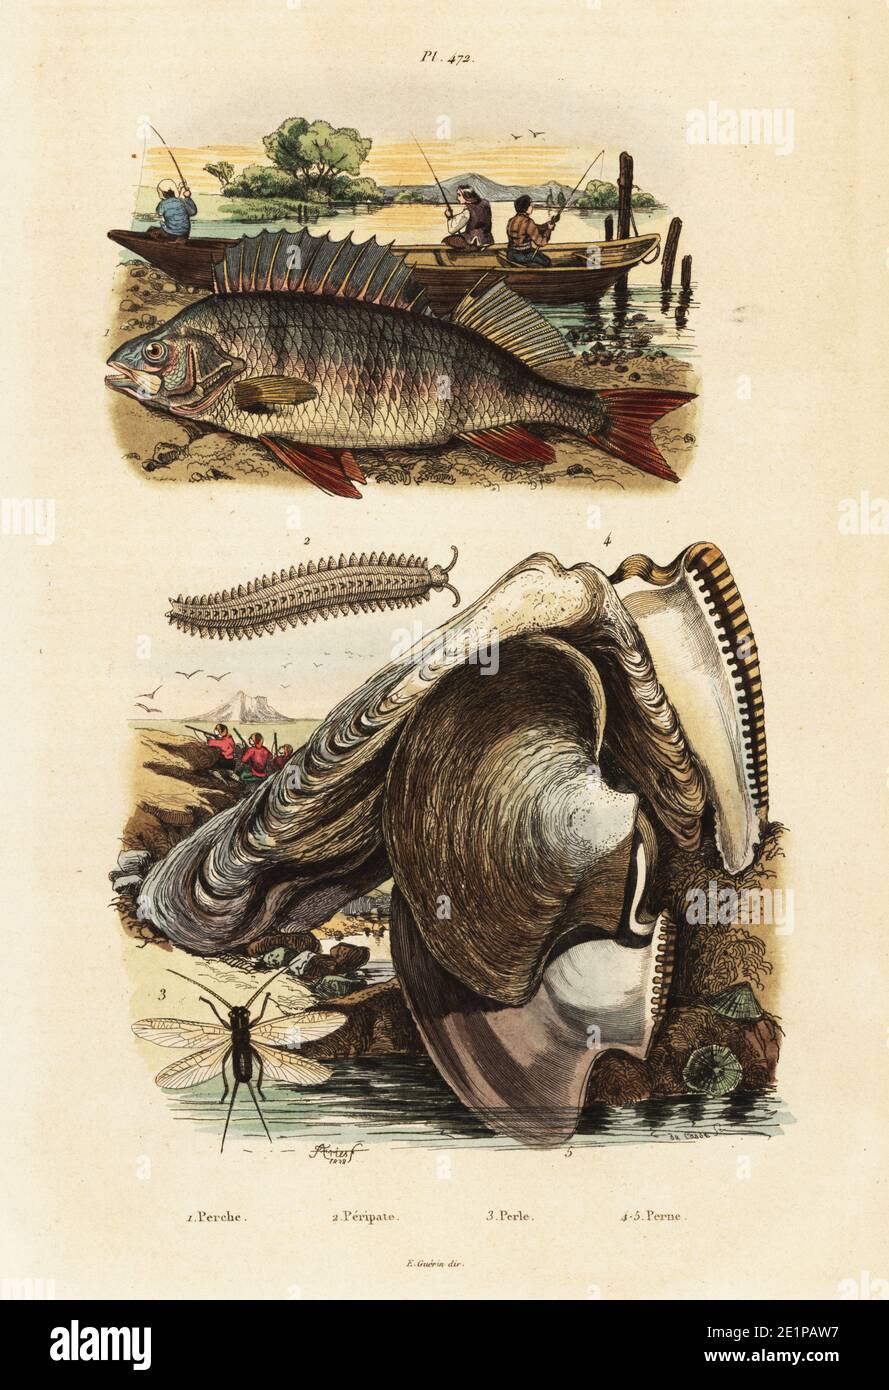 European perch, Perca fluviatilis 1, and fishermen fishing with rods, velvet worm, Peripatus iuliformis 2, lacewing, Perla marginata 3, and pearl oyster, Isognomon isognomum 4. Perche, Peripate, Perle, Perne. Handcoloured steel engraving by du Casse after an illustration by Adolph Fries from Felix-Edouard Guerin-Meneville's Dictionnaire Pittoresque d'Histoire Naturelle (Picturesque Dictionary of Natural History), Paris, 1834-39. Stock Photo